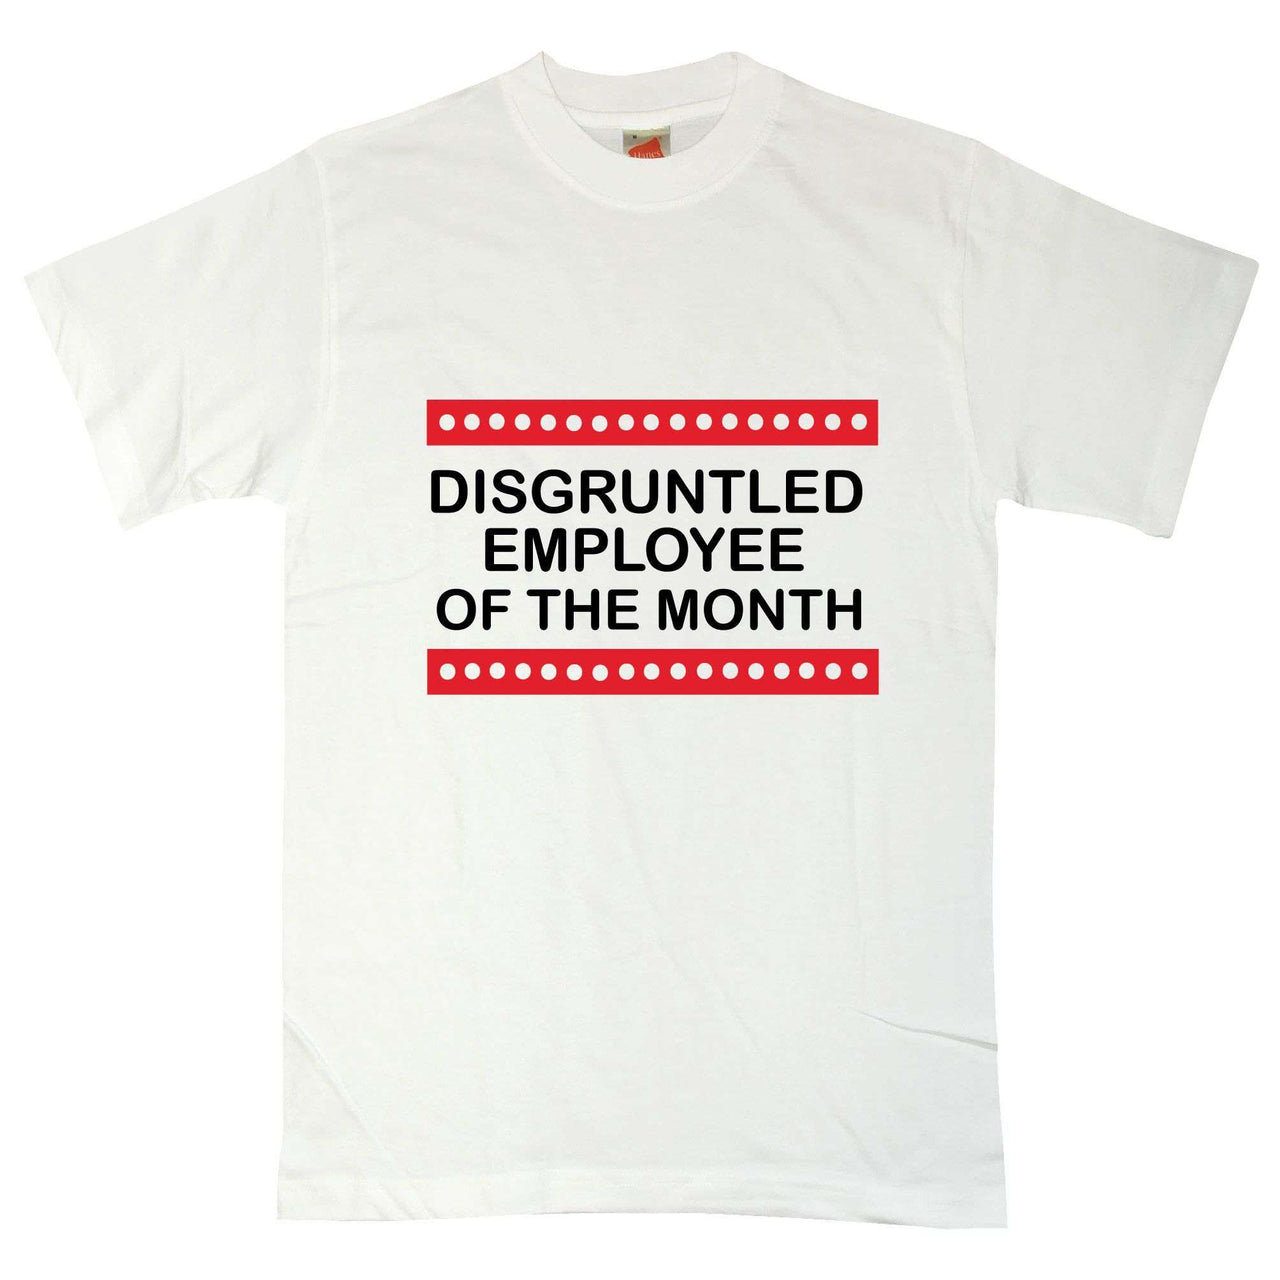 Disgruntled Employee Of The Month Graphic T-Shirt For Men 8Ball